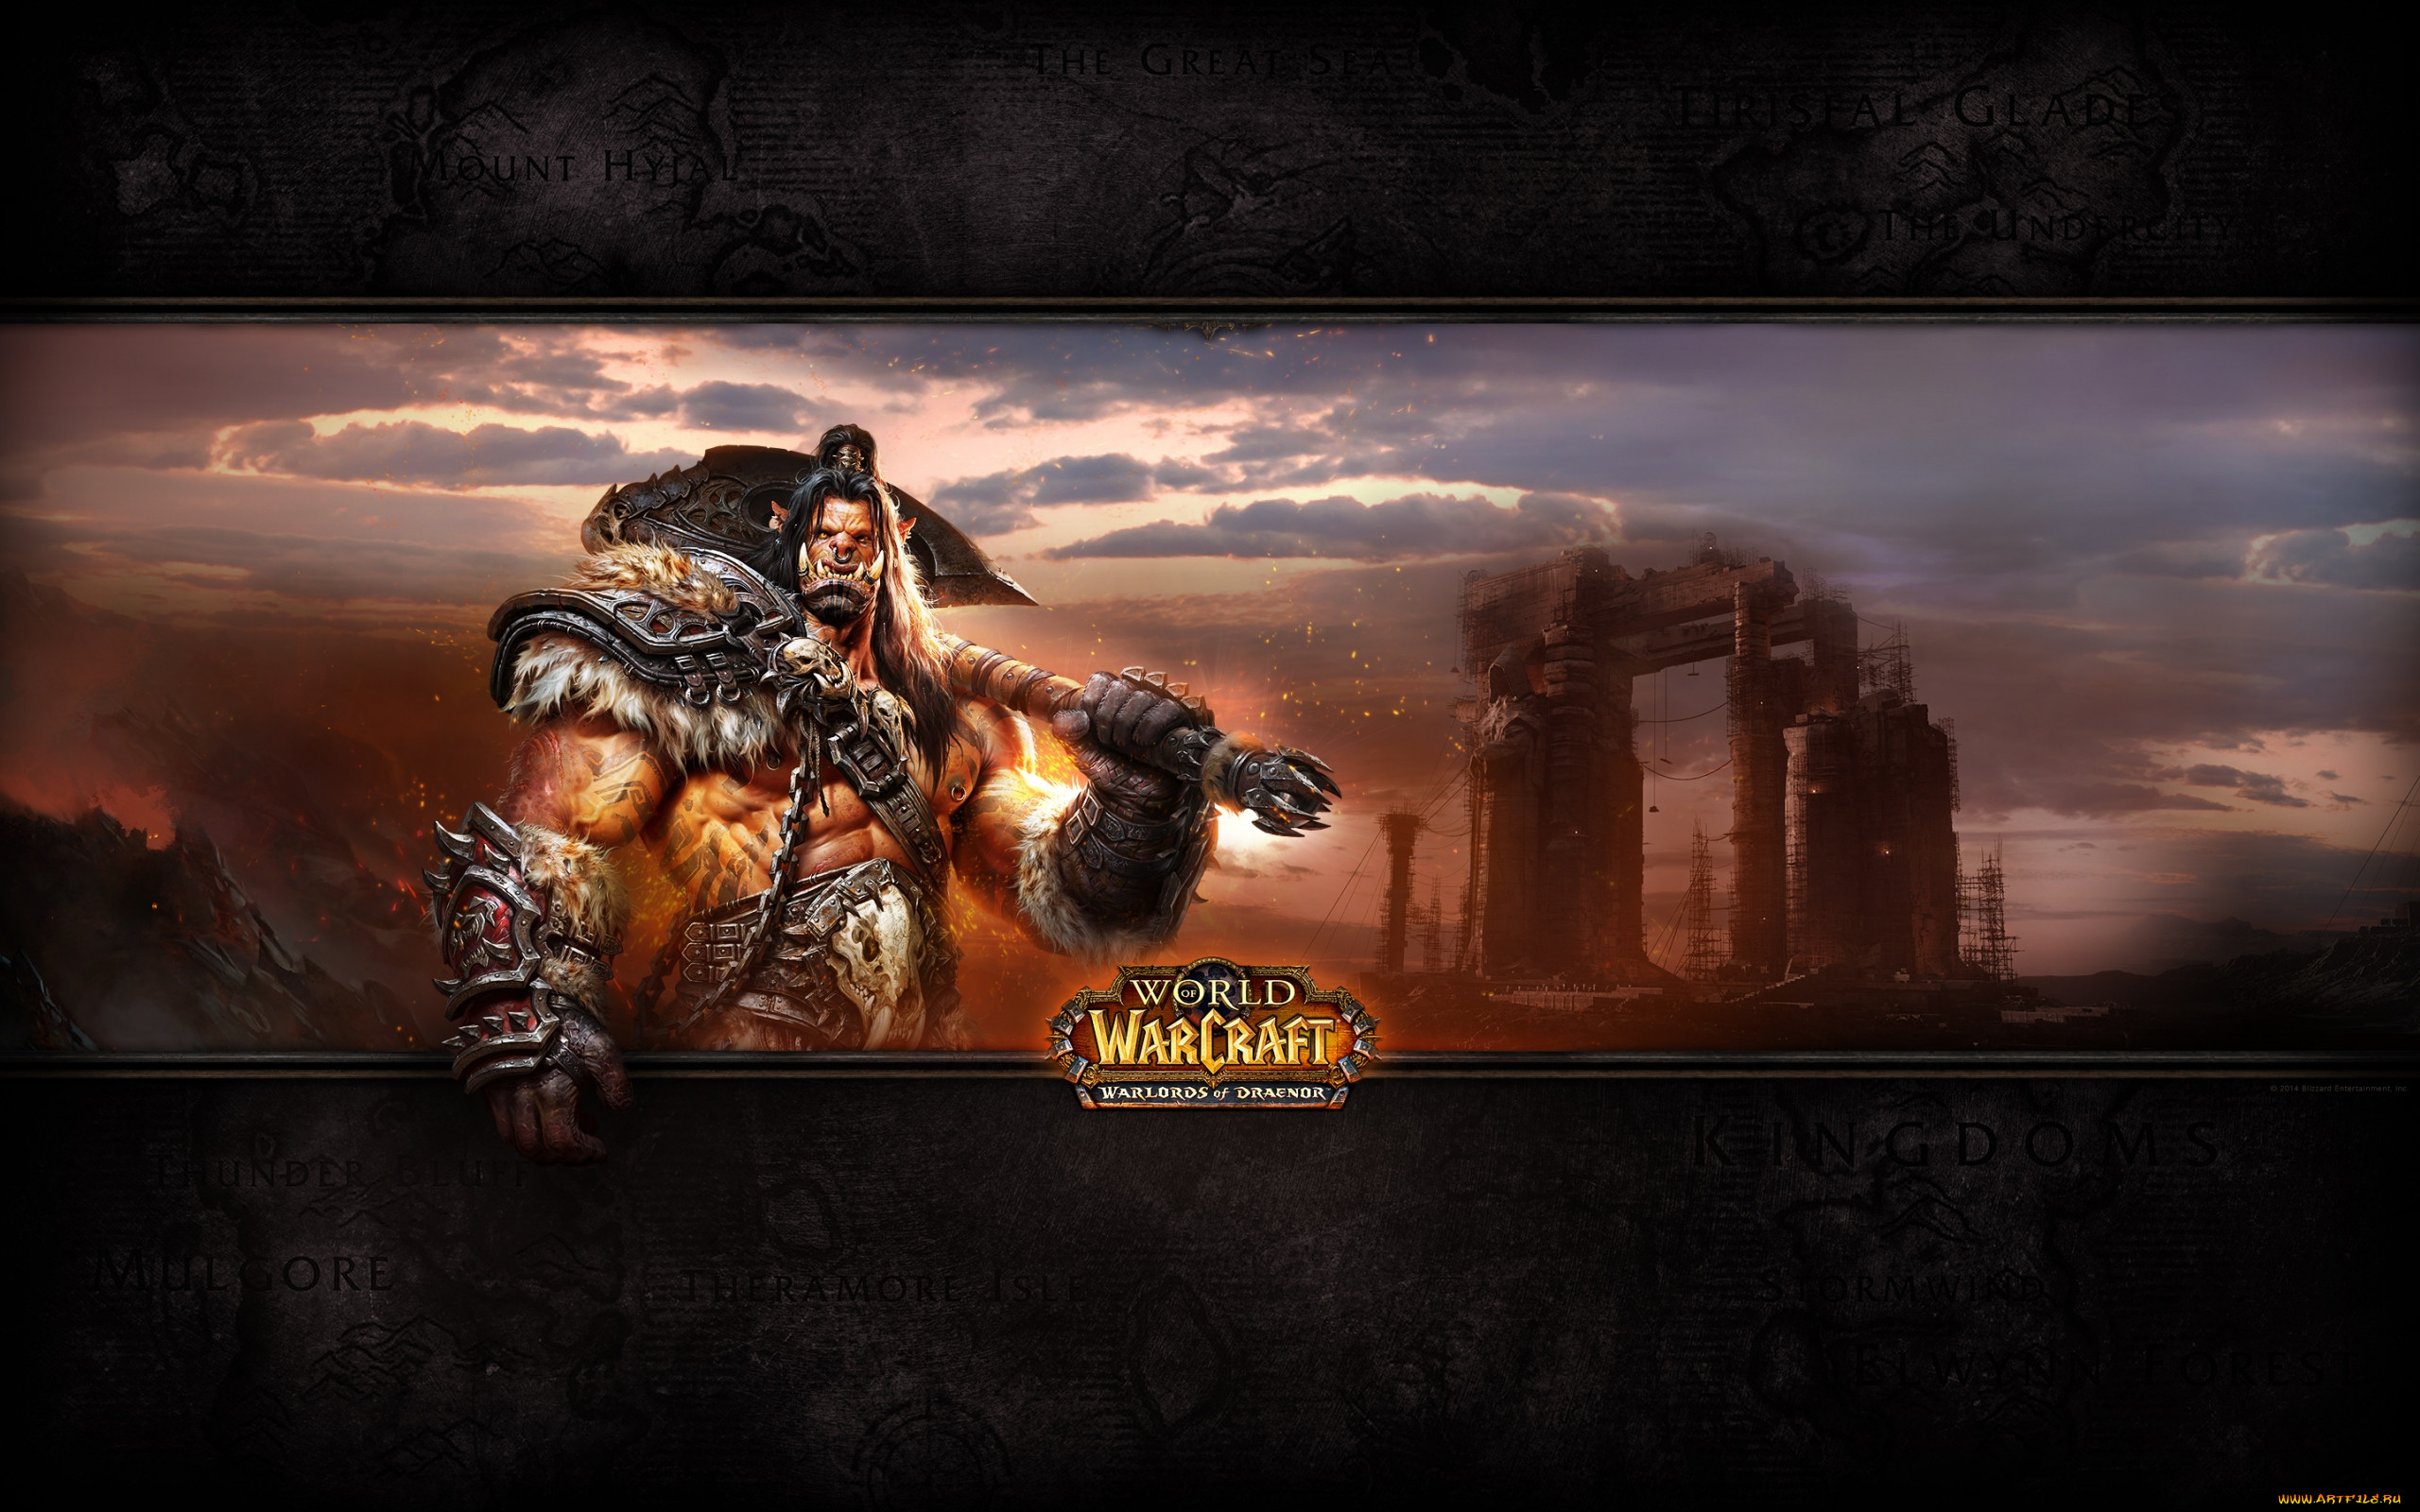 Warcraft Warlords of Draenor